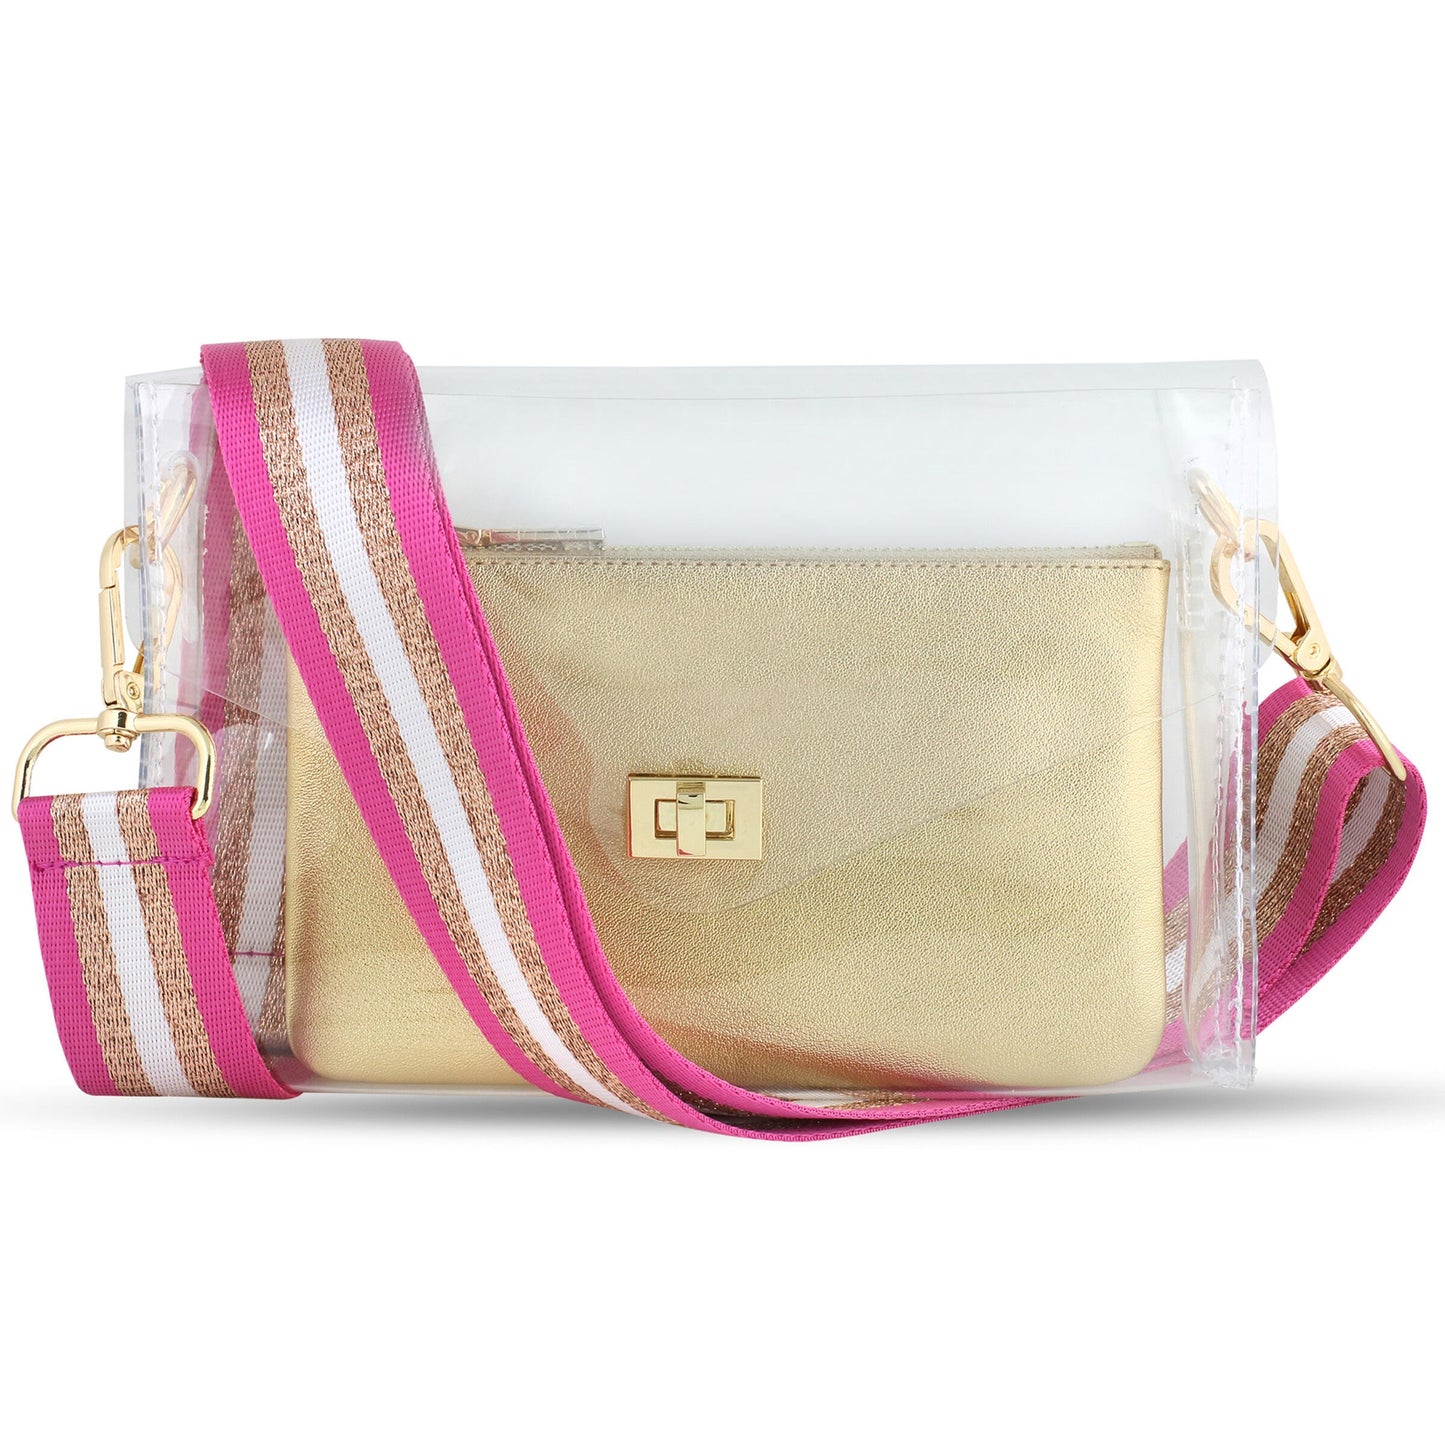 Carrying Kind Cross Body Strap